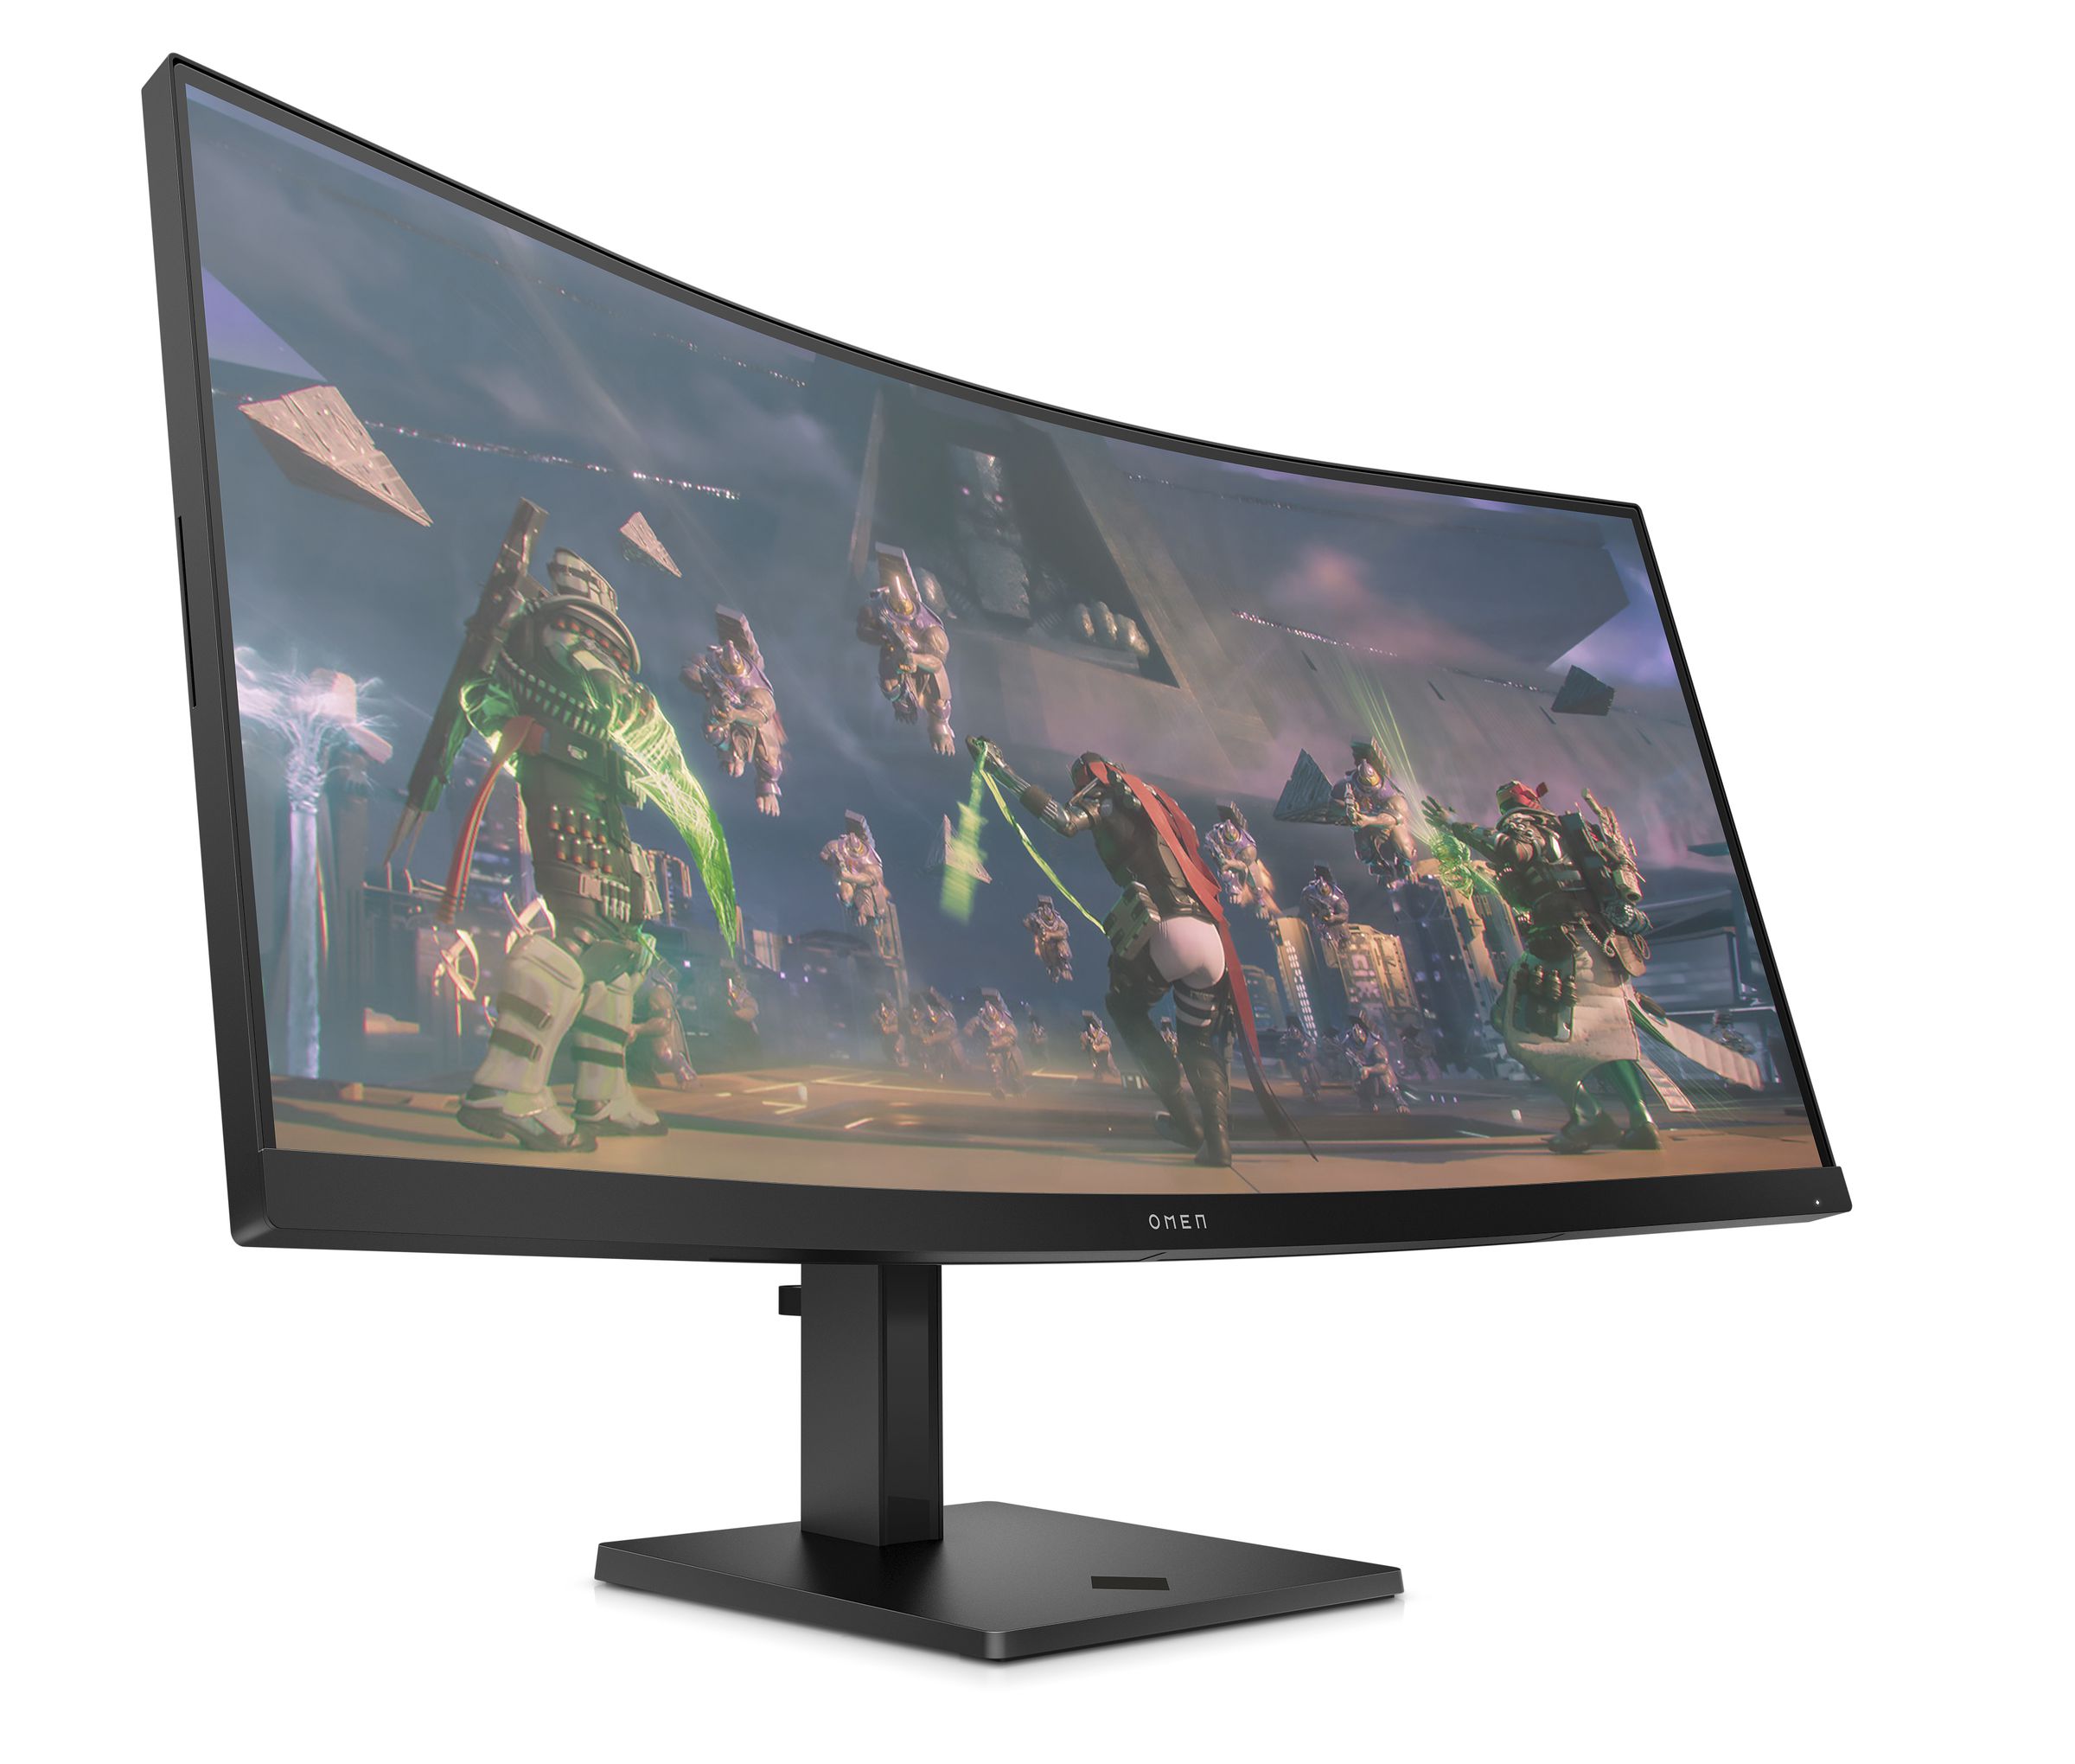 The HP Omen 34c gaming monitor against a white backdrop.